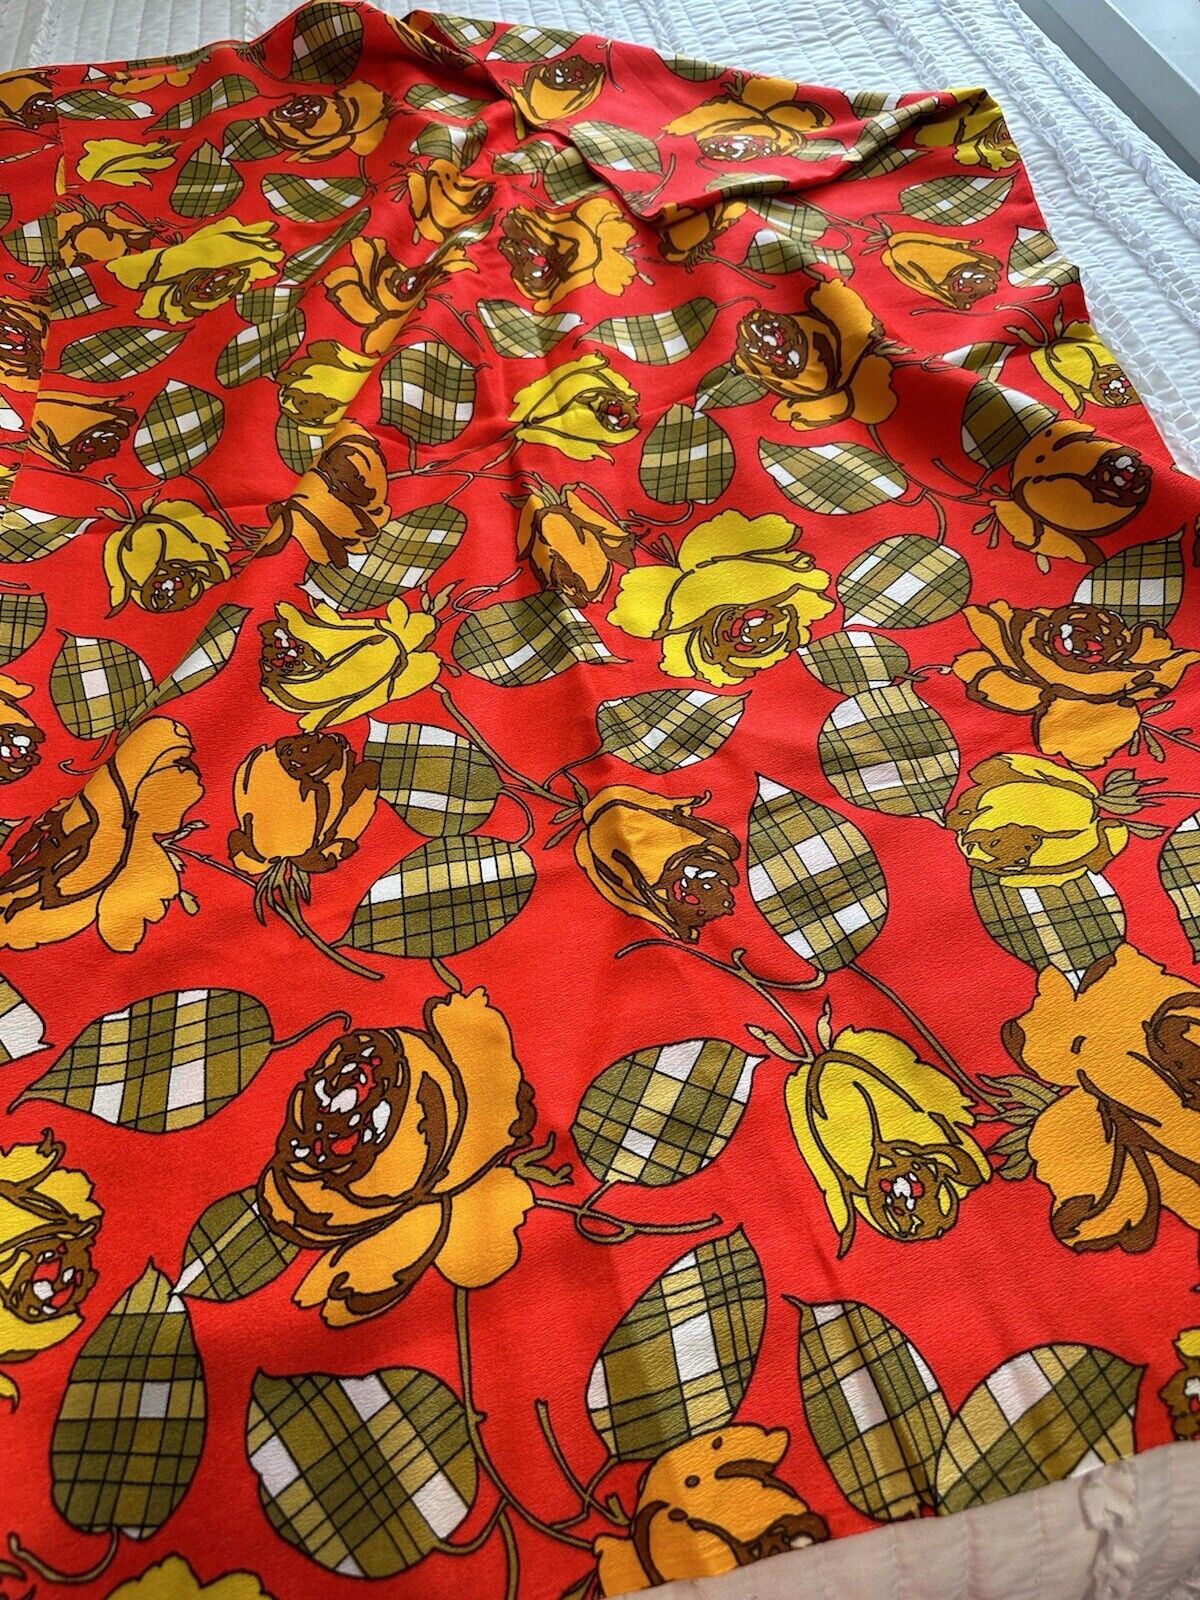 Vintage 60s 70s Mod Hippie Flower Power MCM Bold Floral Fabric 3 Yards Red Orang